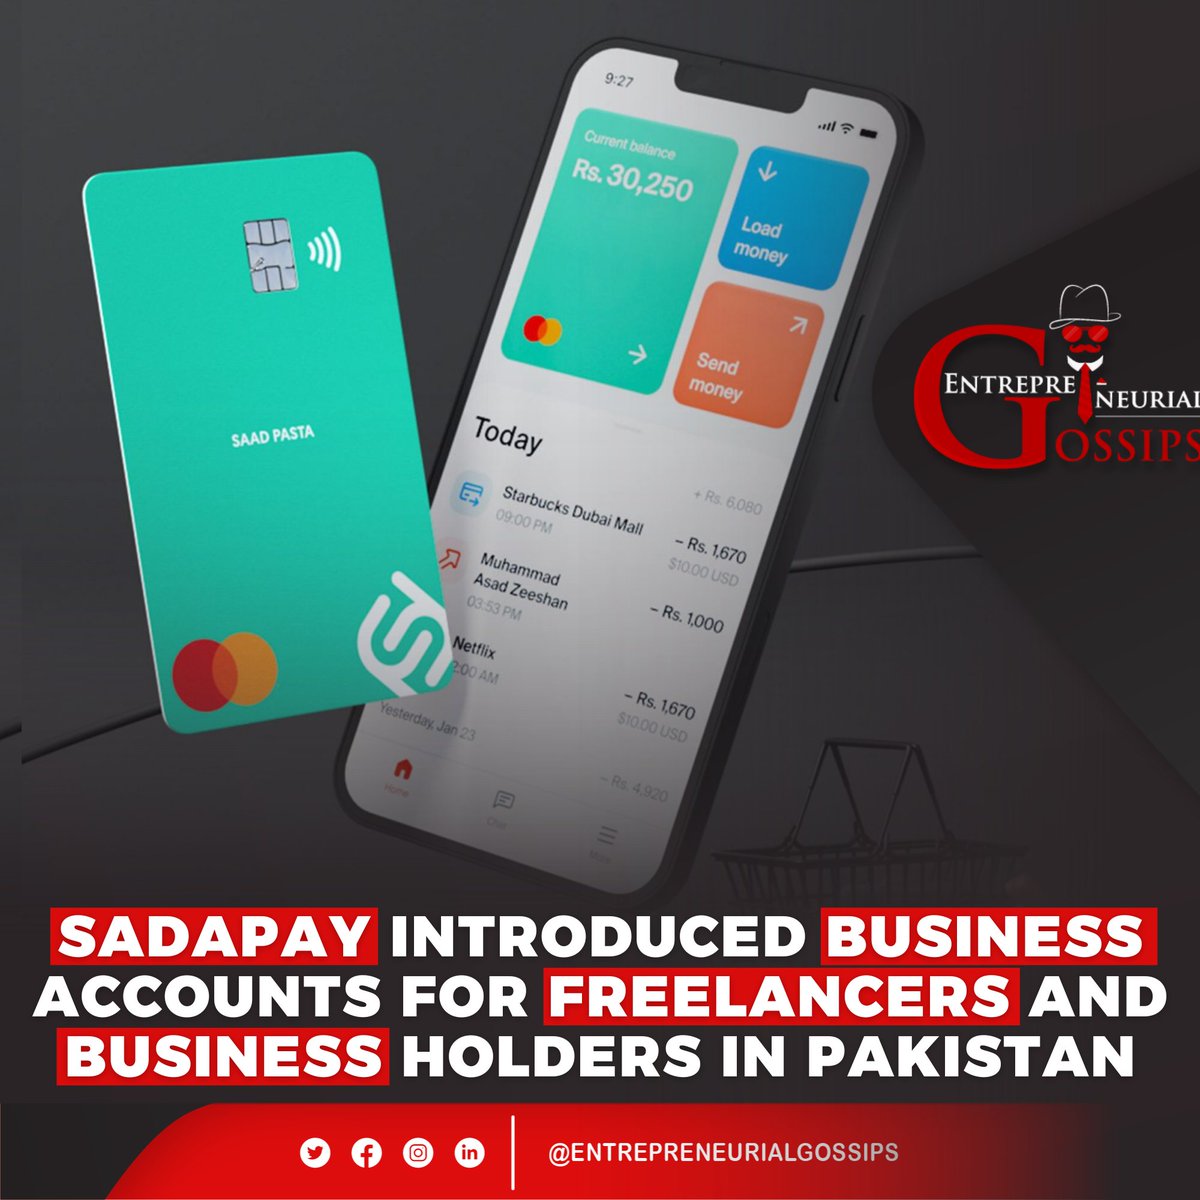 Sadapay introduced business accounts for freelancers and business holders in Pakistan.

#entrepreneurialgossips #sadapay #freelancers #freelancerspakistan #EmergingPakistan #entrepeneurs #entrepeneurship